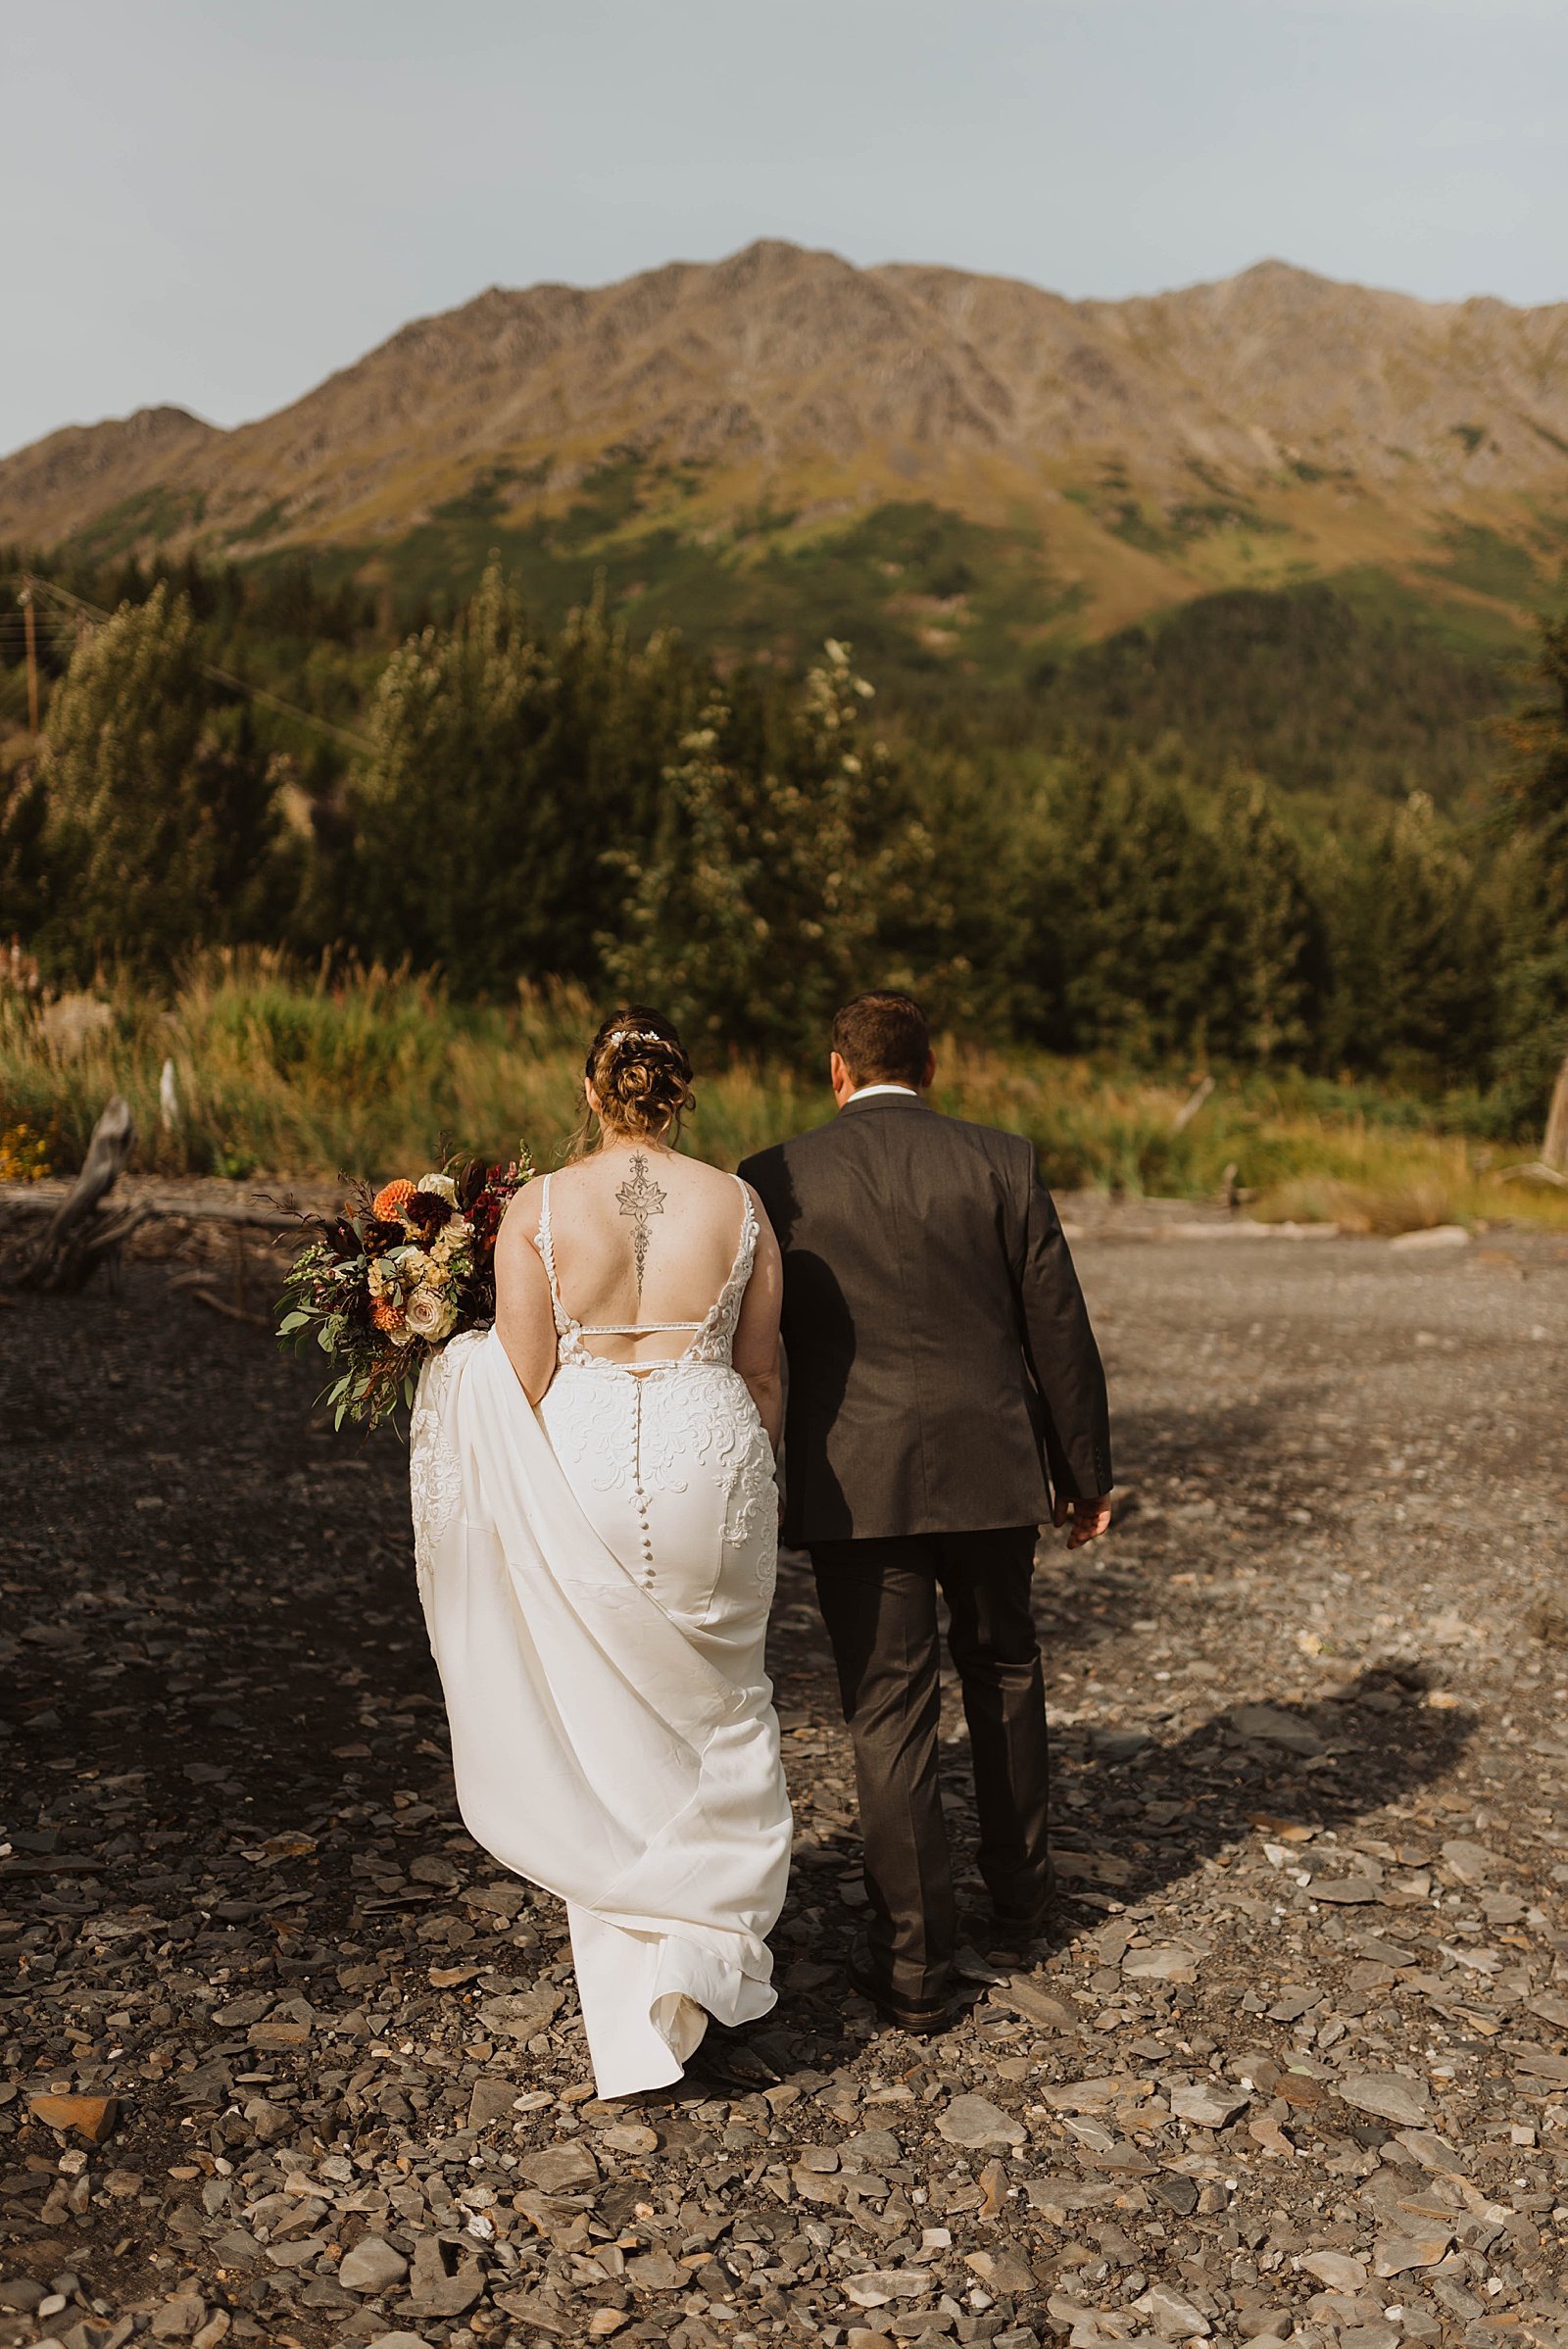  Adventurous bride and groom walking together after private ceremony  